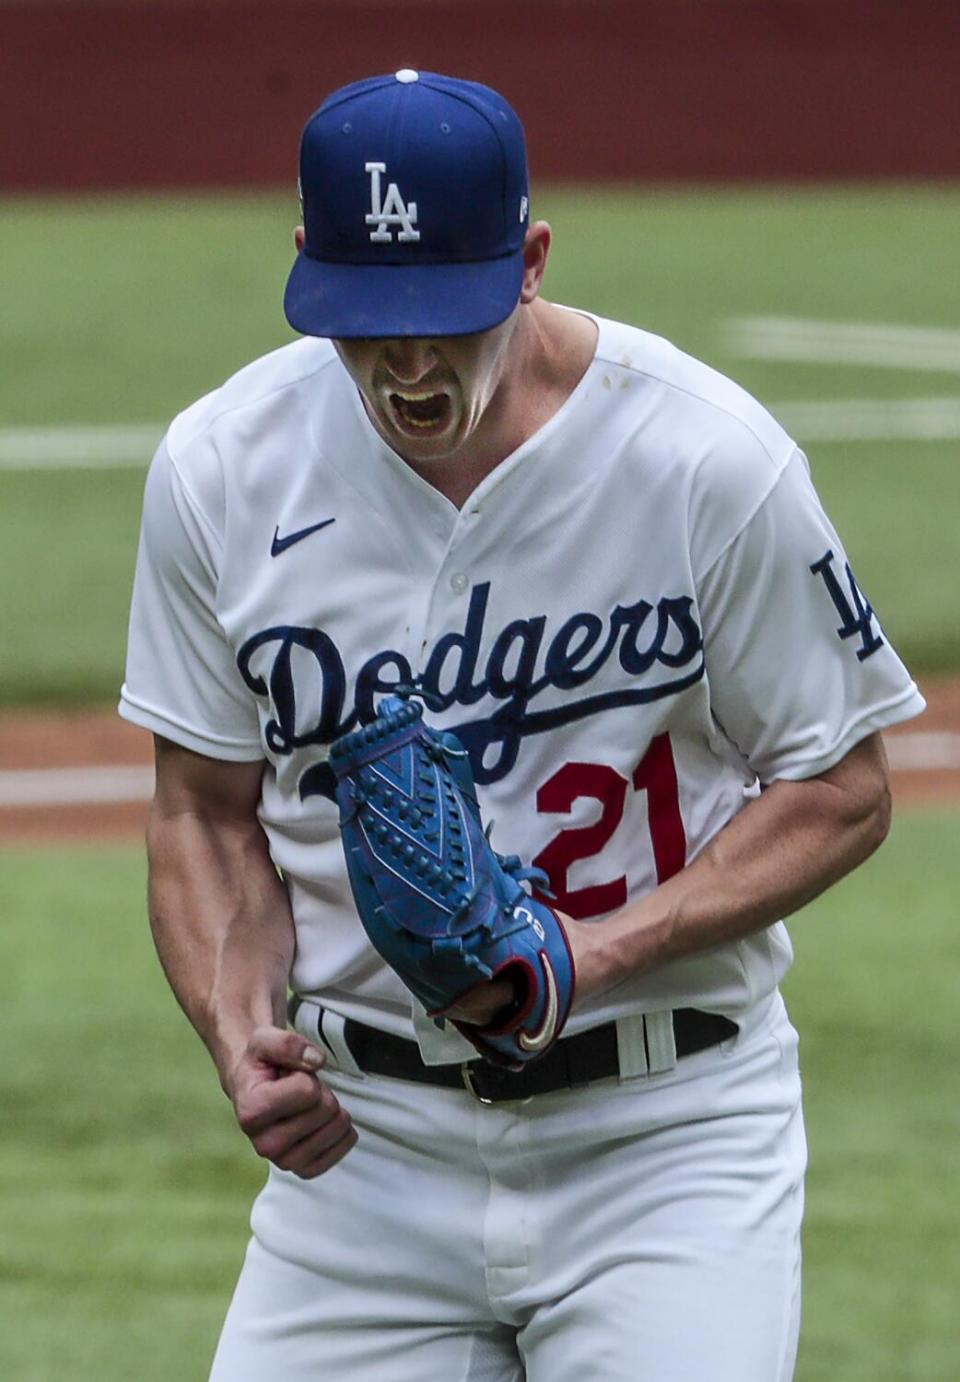 Dodgers starting pitcher Walker Buehler lets out a yell after retiring Atlanta's Cristian Pache with bases loaded in Game 6.